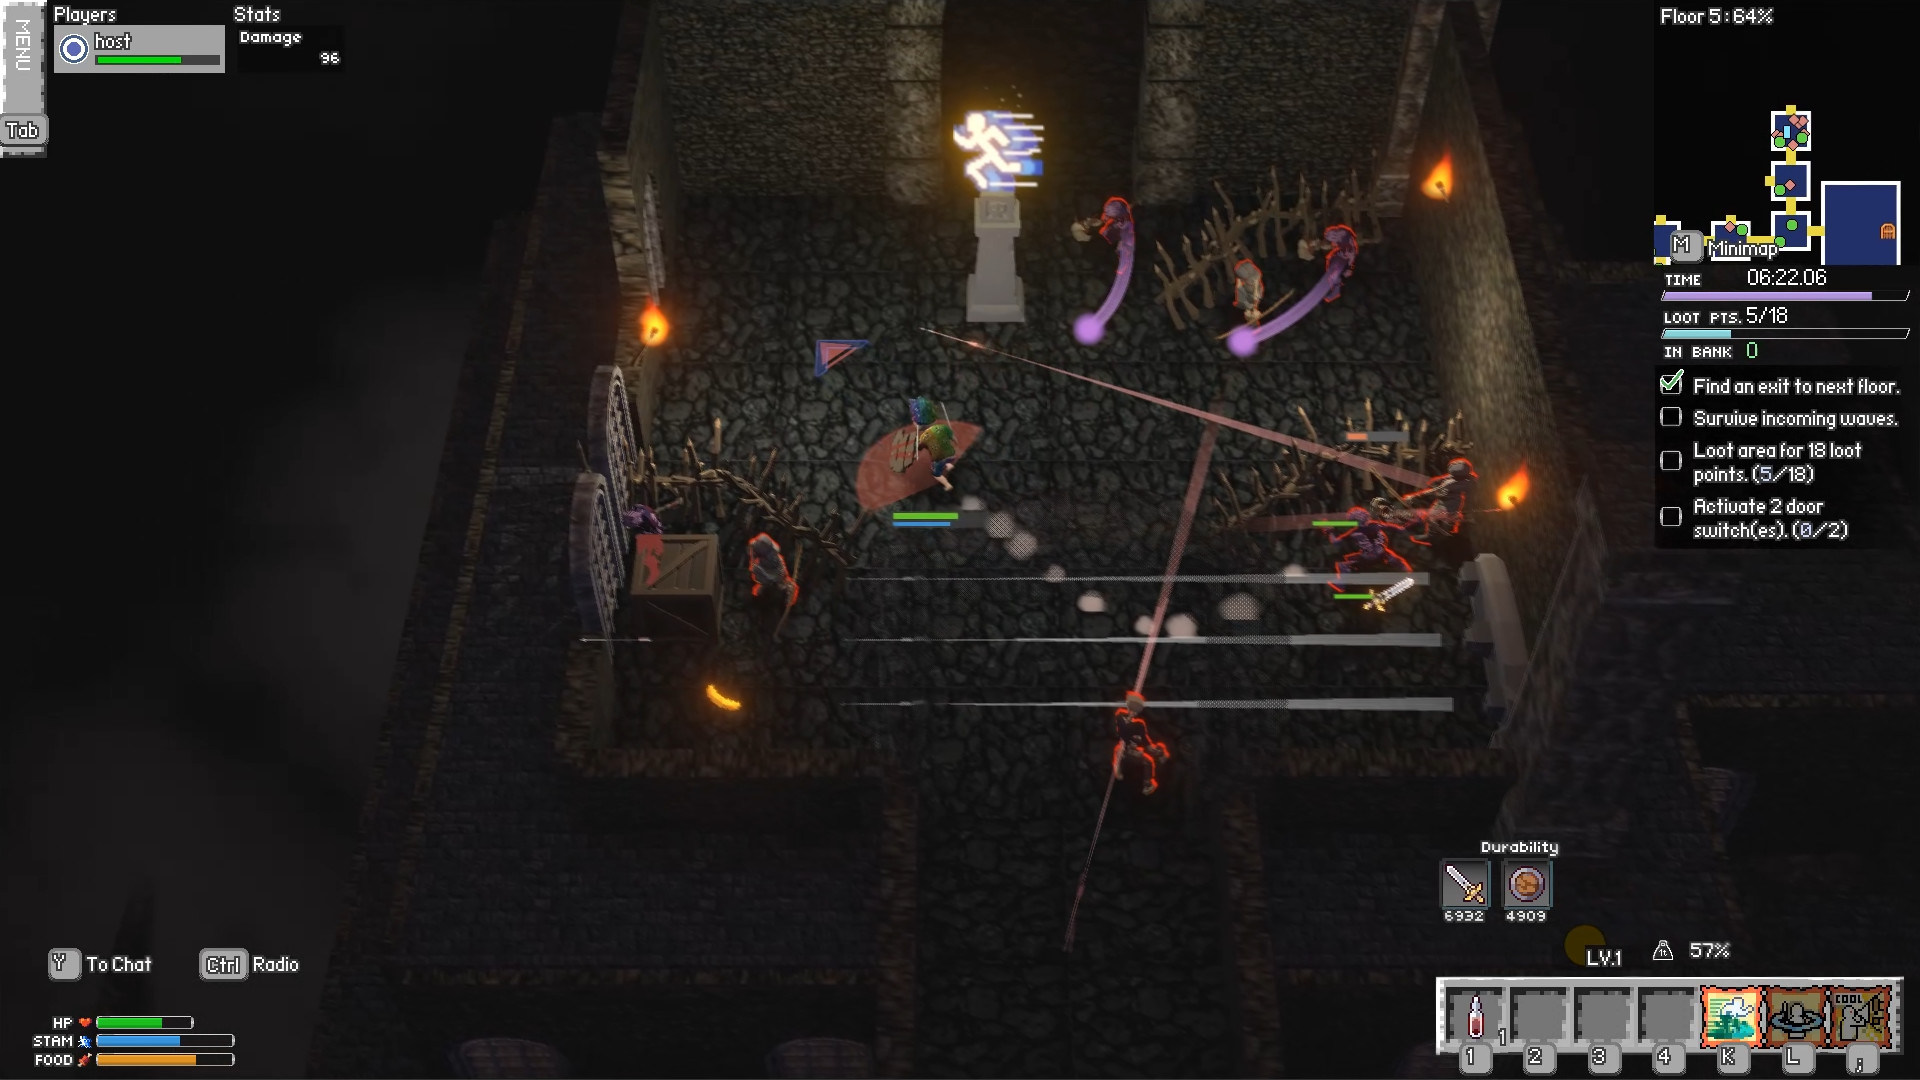 Dungeon Looter Free Download